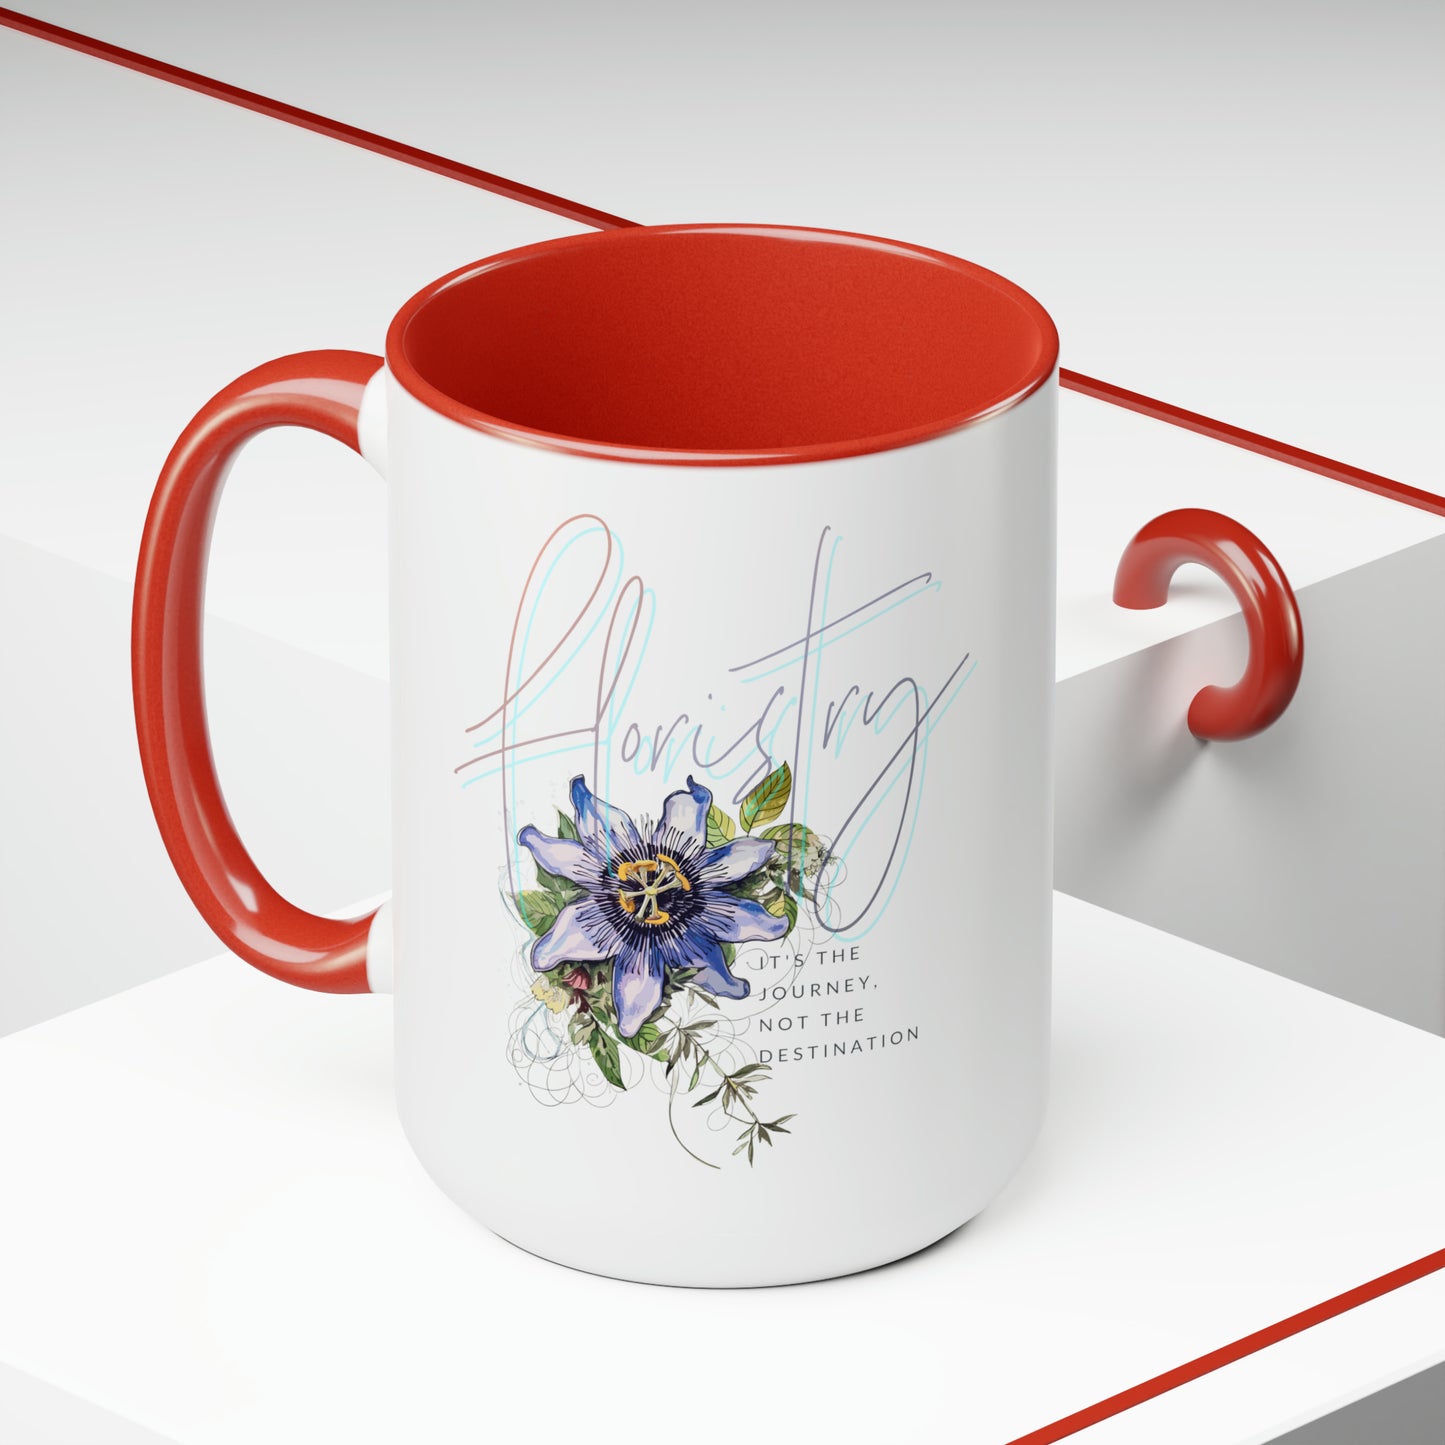 floristry, it's the journey not the desination - 15oz graphic mug